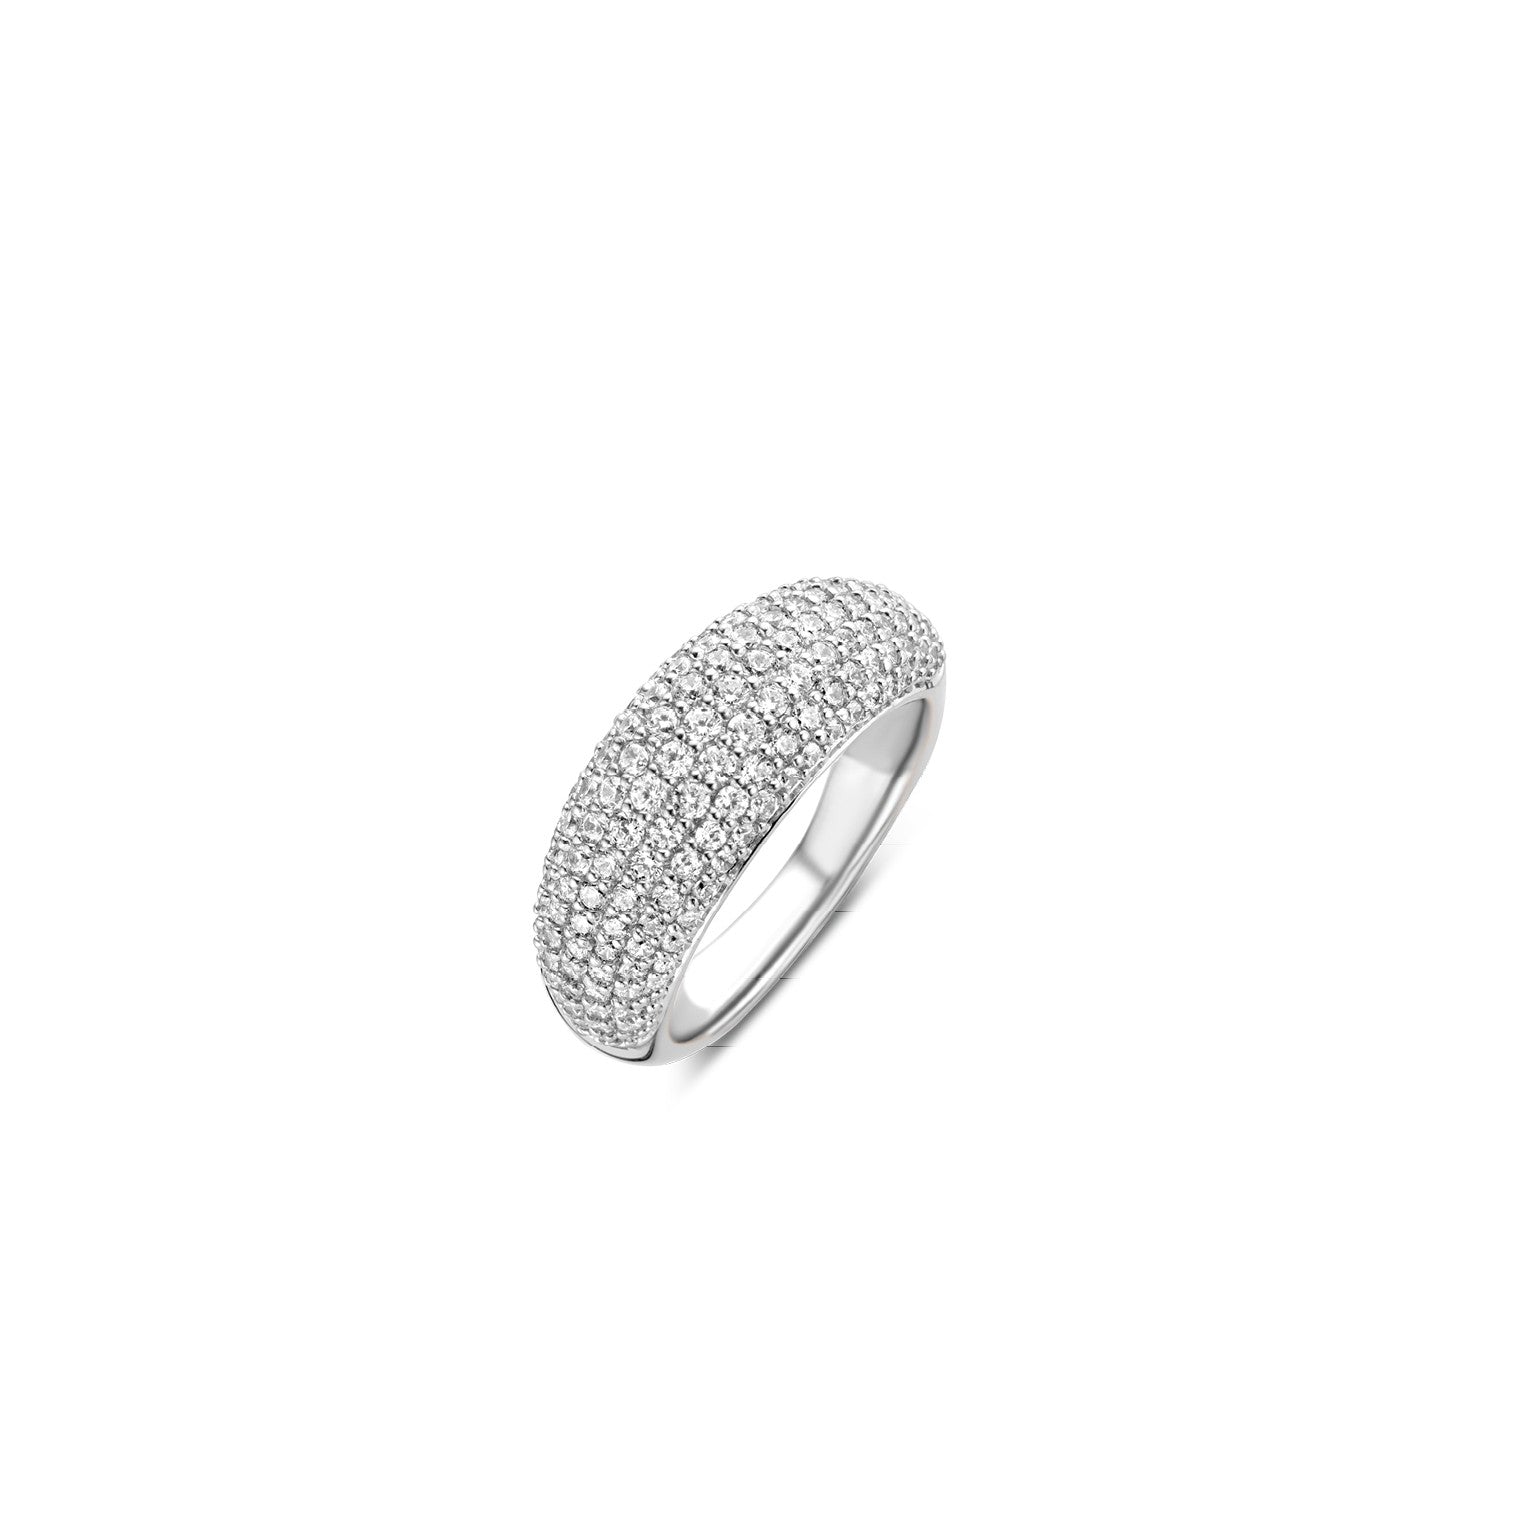 Second Impressions Pave Ring